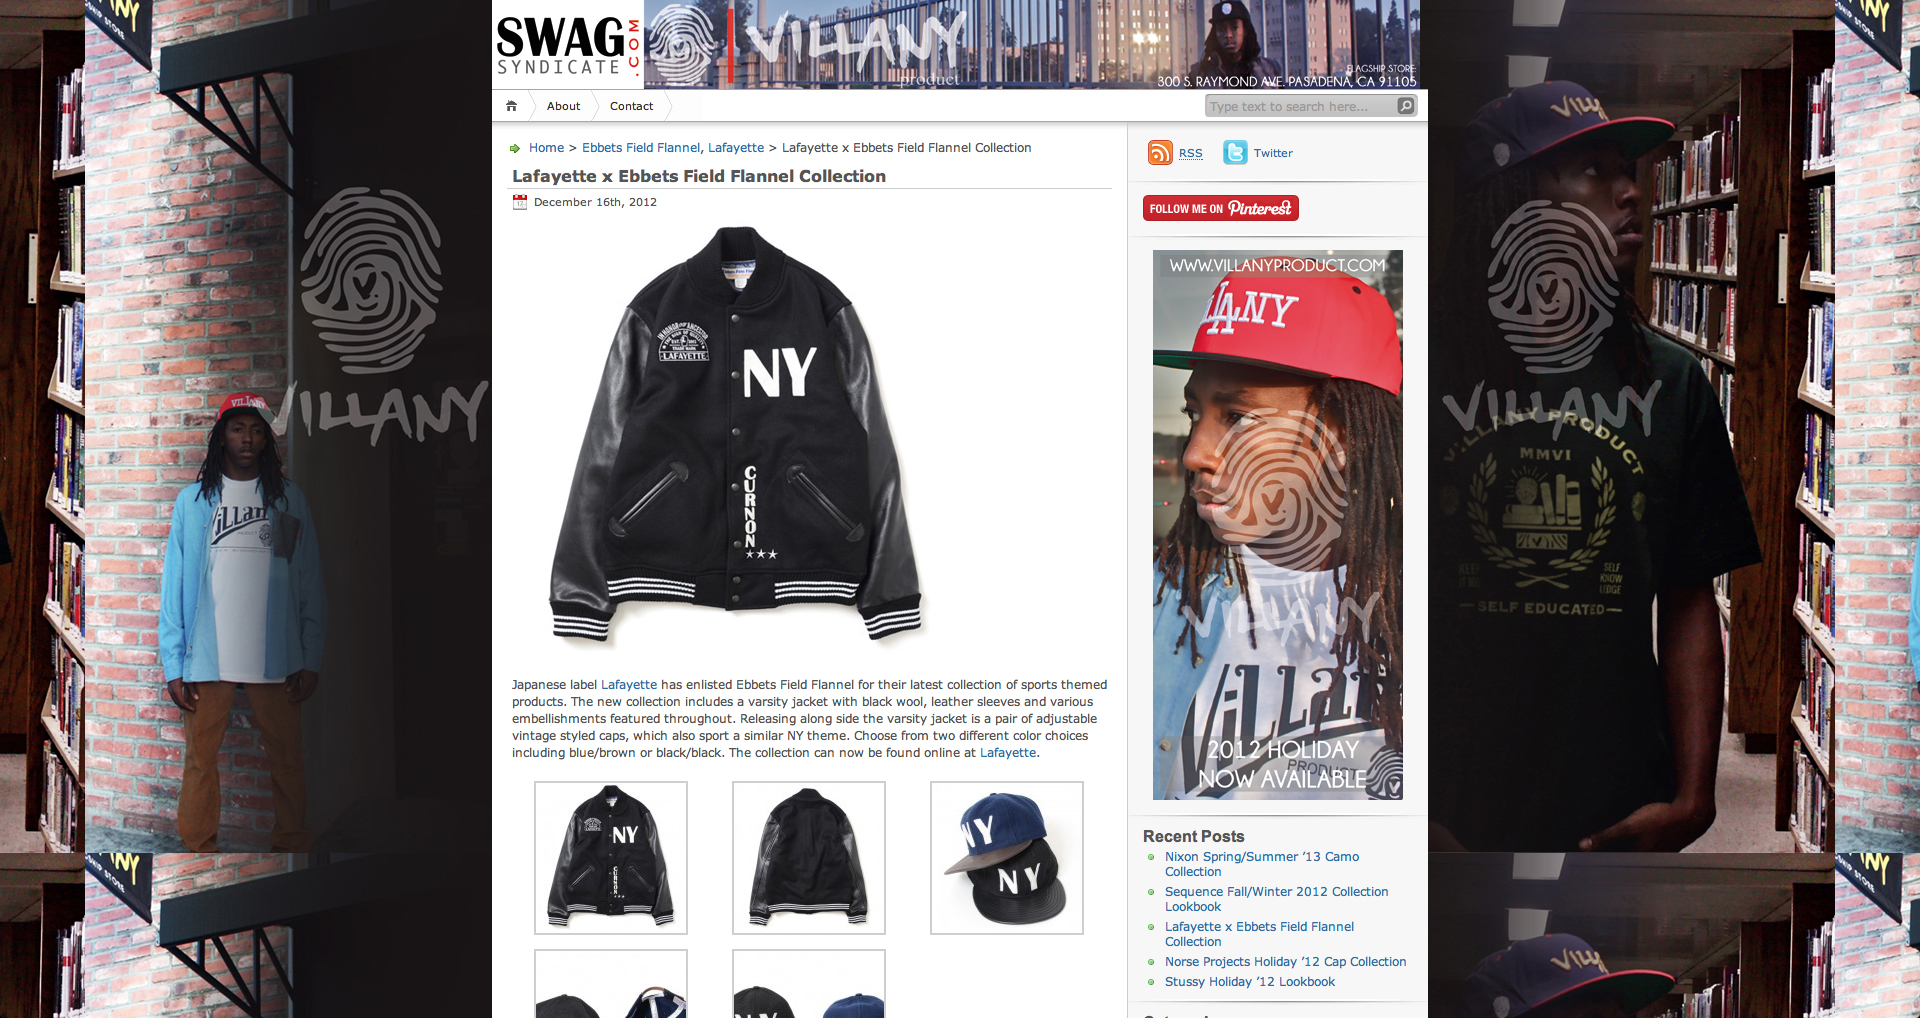 Posted “Lafayette x Ebbets Field Flannel Collection” on Swag Syndicate